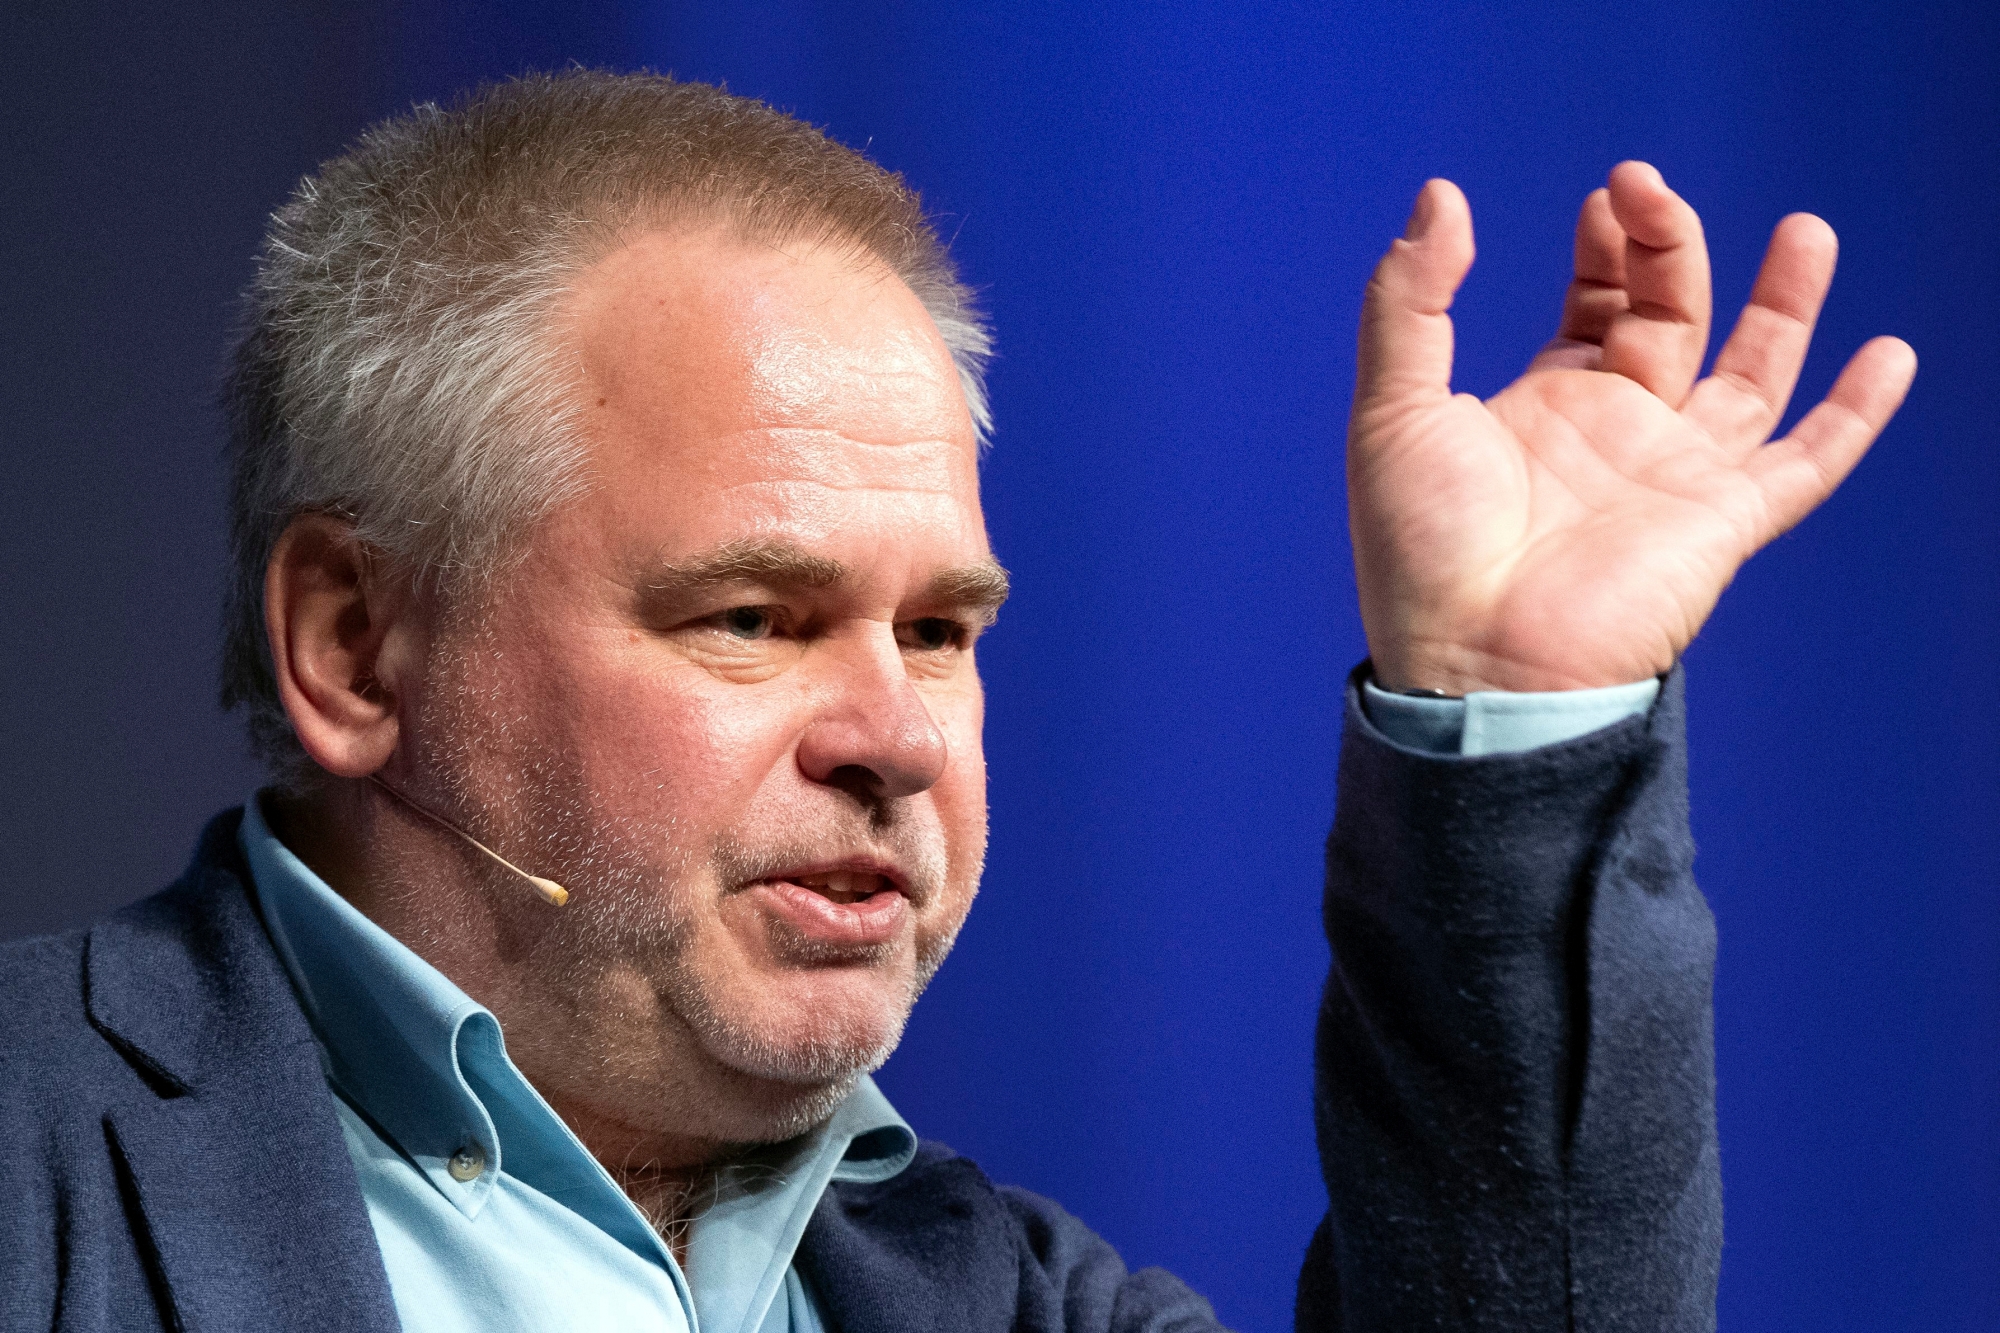 Eugene Kaspersky, Founder and CEO of Kaspersky Lab, speaks during a presentation during the first edition of the Swiss Cyber Security Days, in Fribourg, Switzerland, this Wednesday, February 27, 2019.  (KEYSTONE/Anthony Anex) SCHWEIZ SWISS CYBER SECURITY DAYS